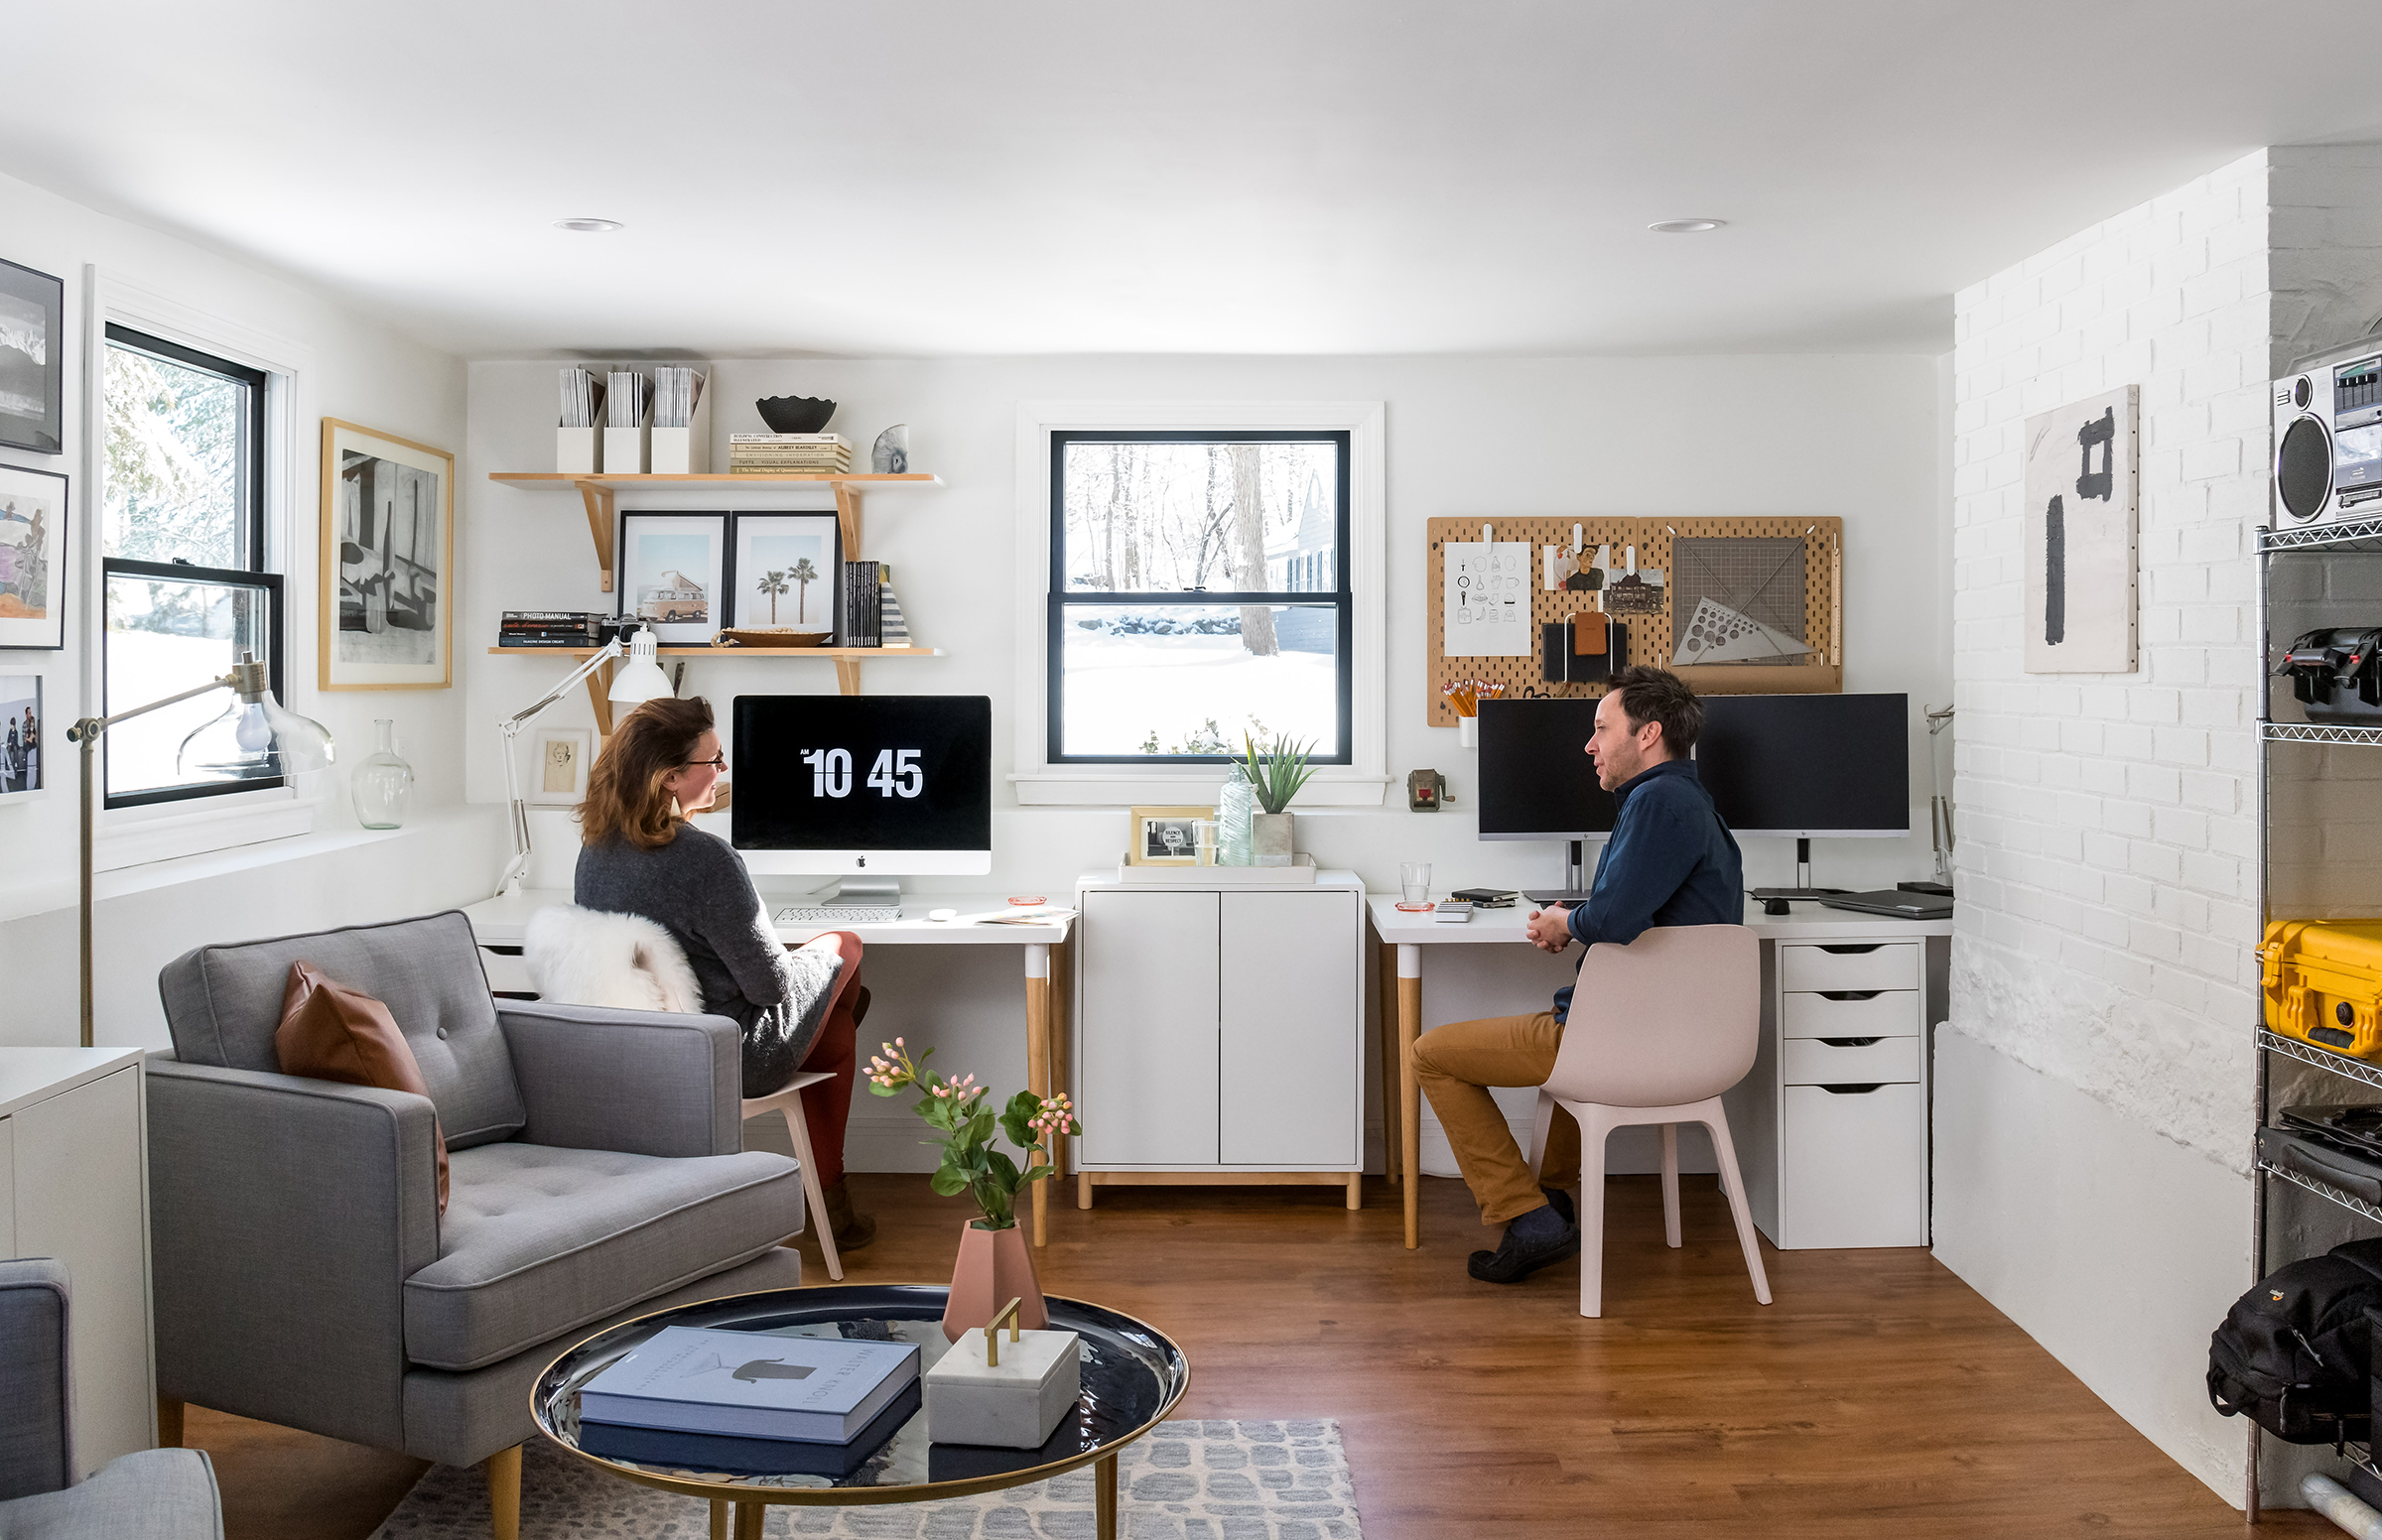 Budget Direct Creates Home Offices Inspired By Directors